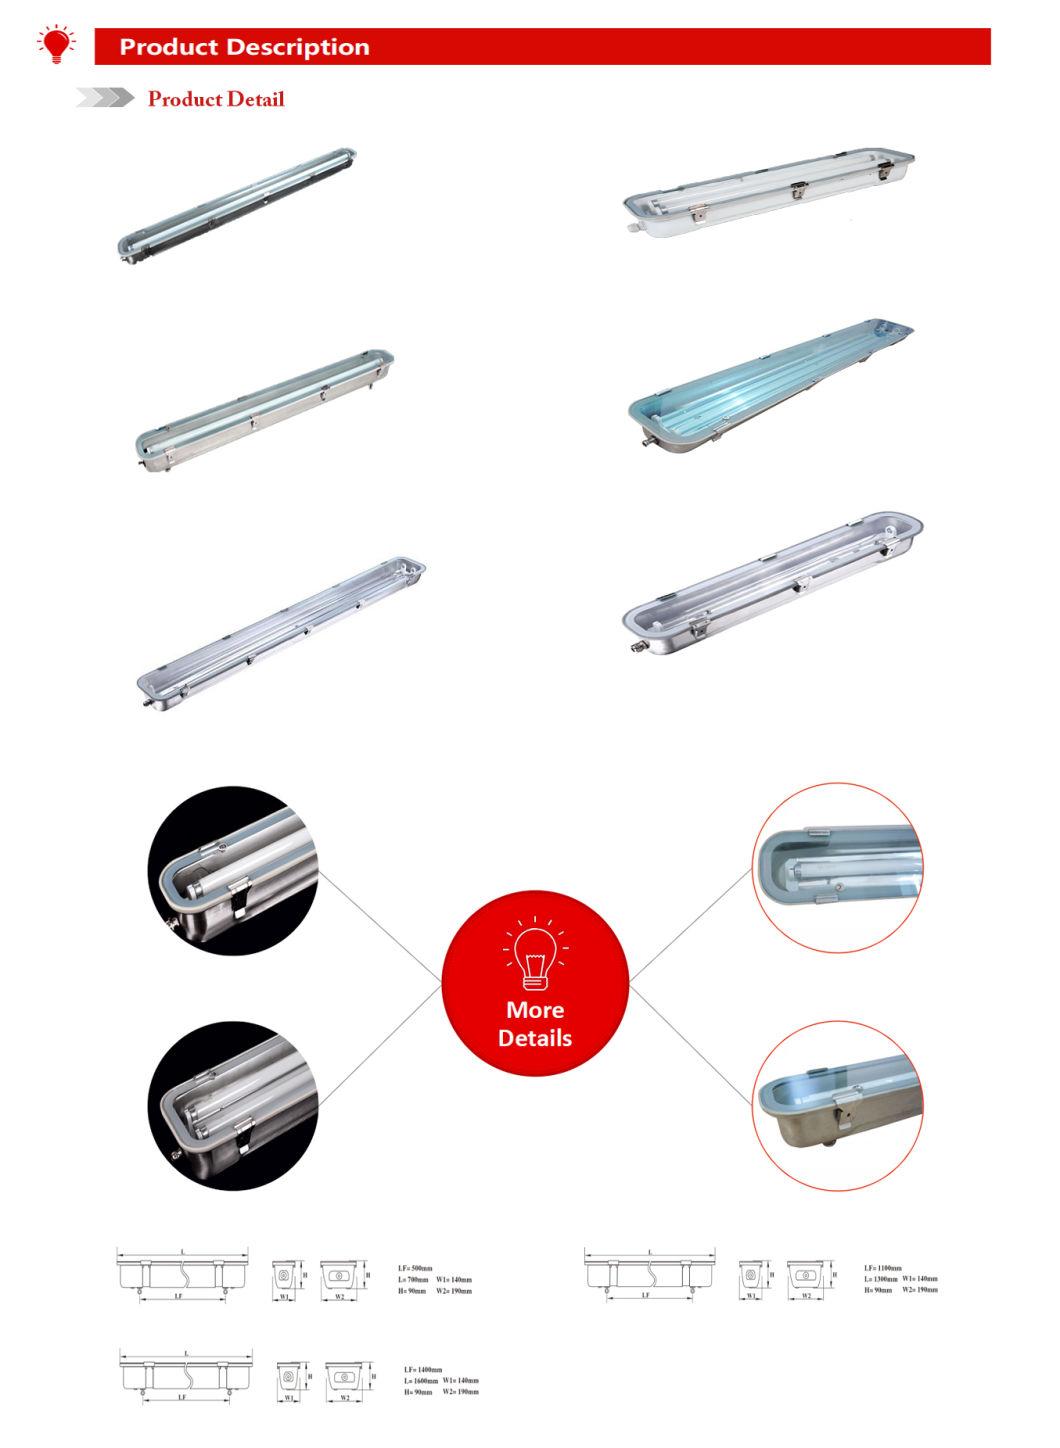 IP65 2*36W 1300mm LED Stainless Steel Toughened Glass Waterproof Light